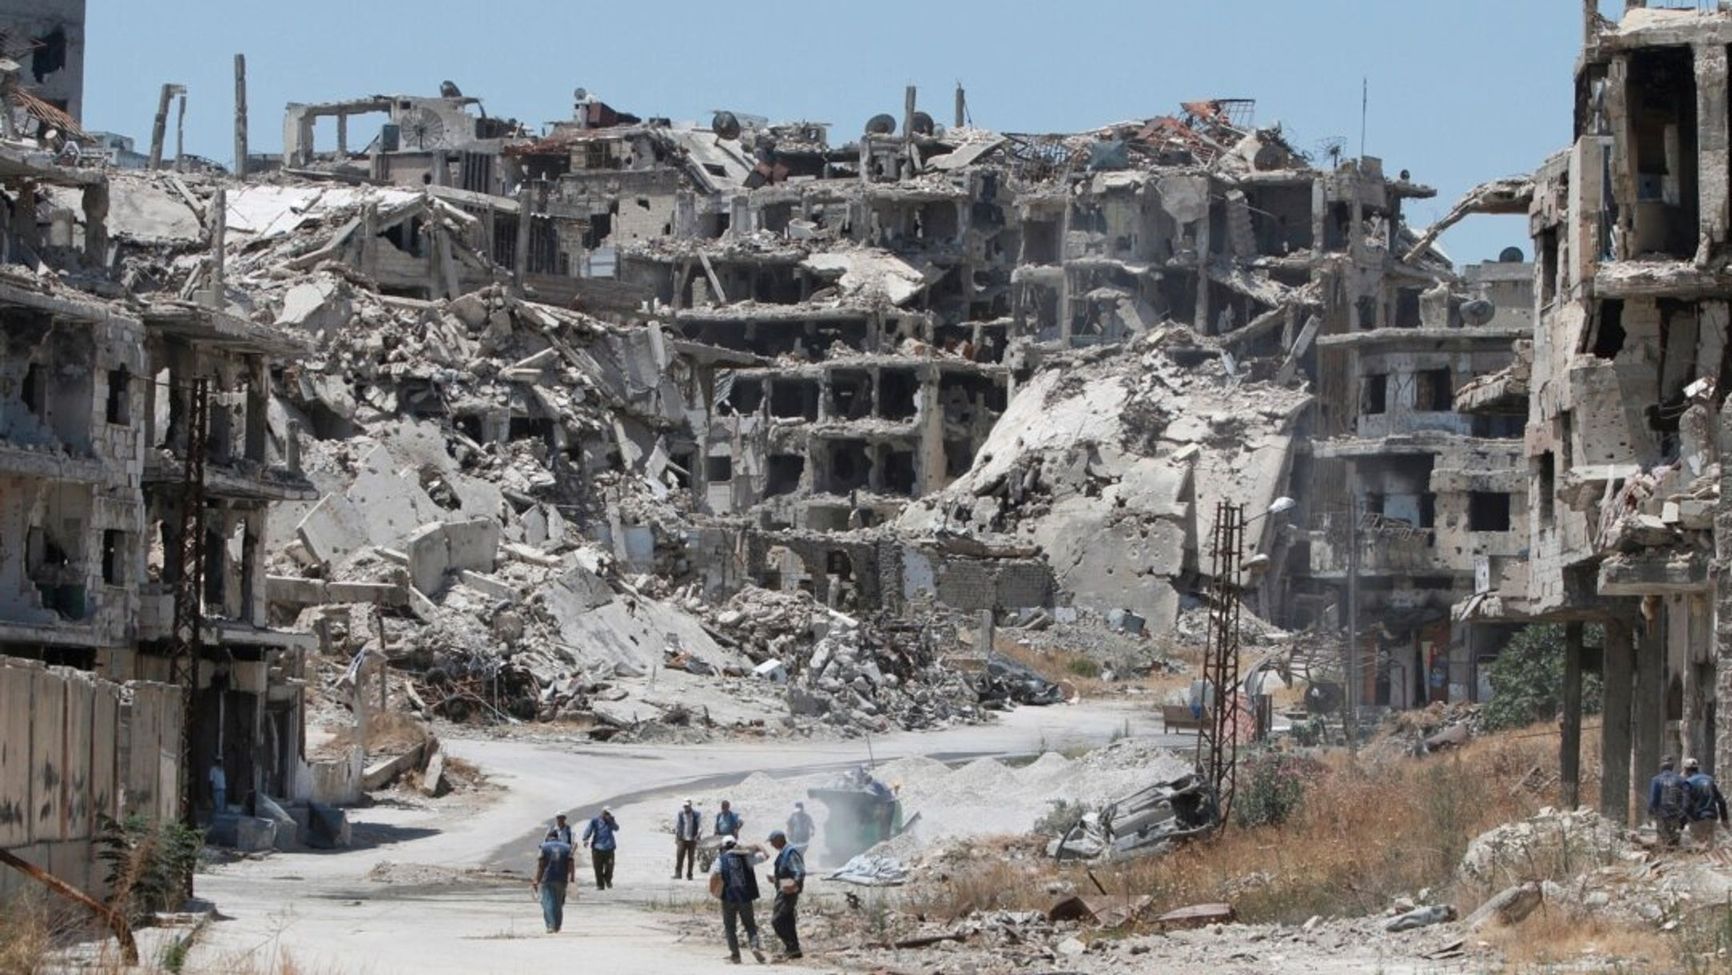 The ruins of Homs